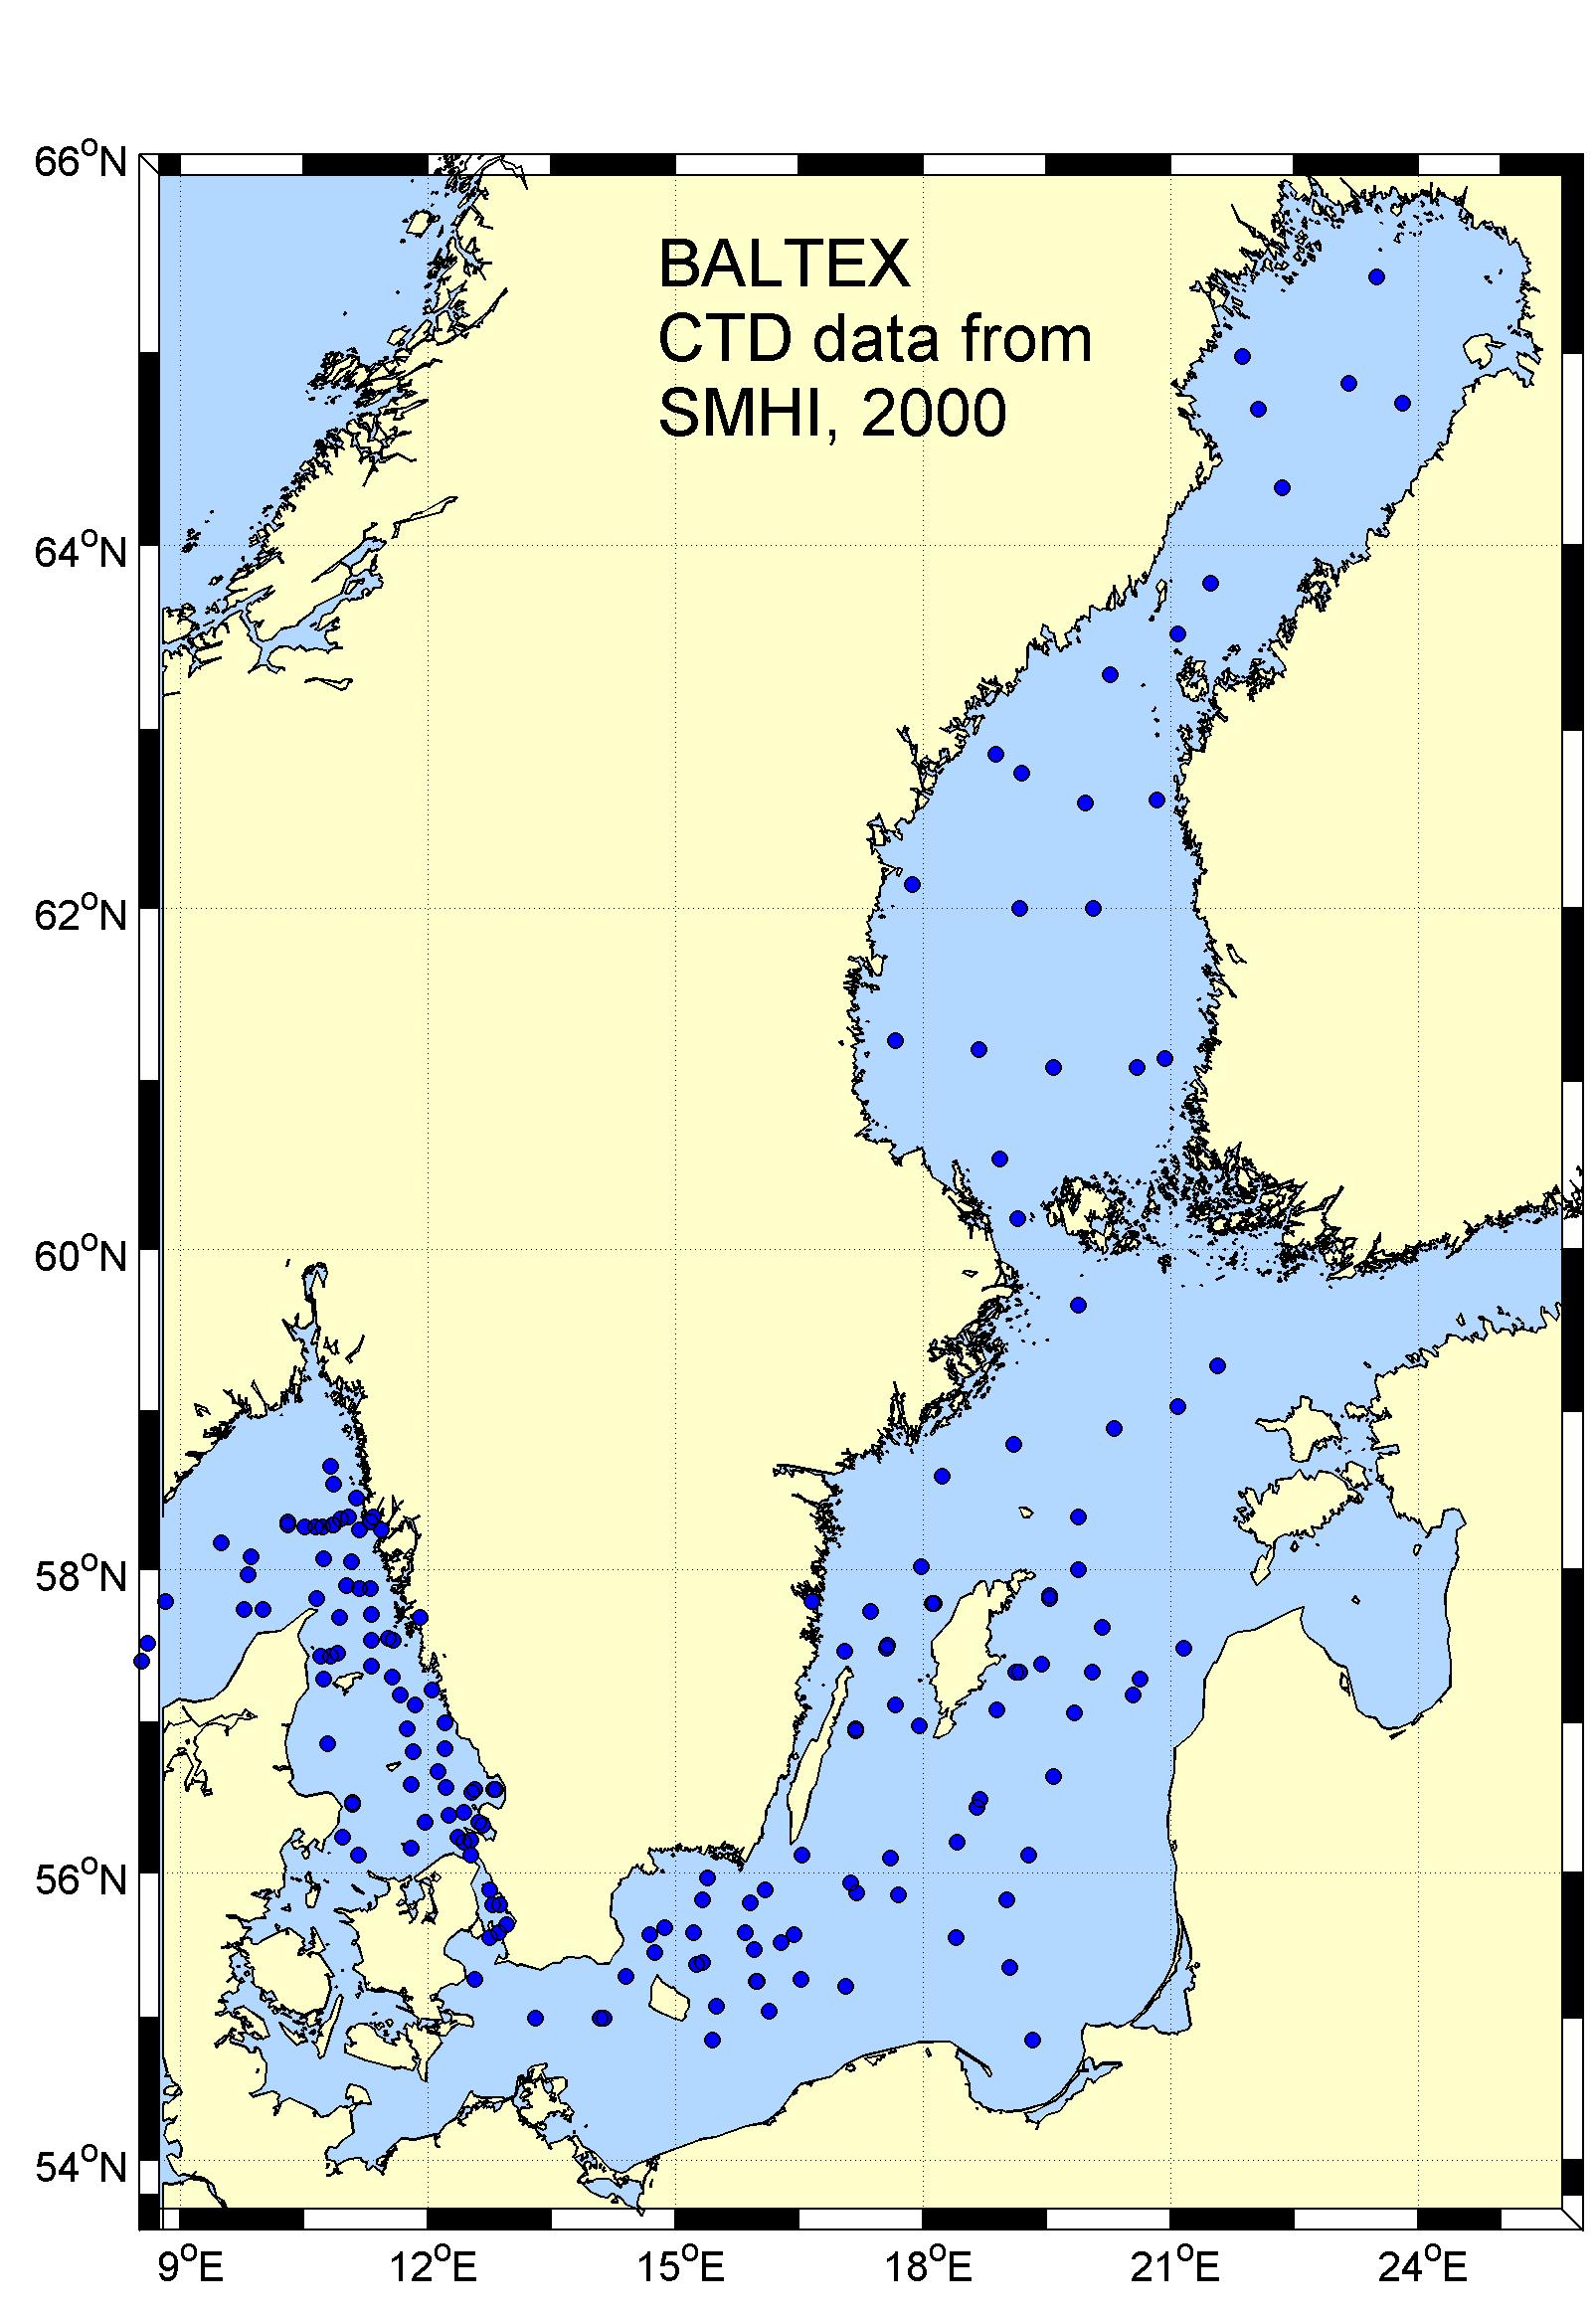 CTD cast data from SMHI, 2000